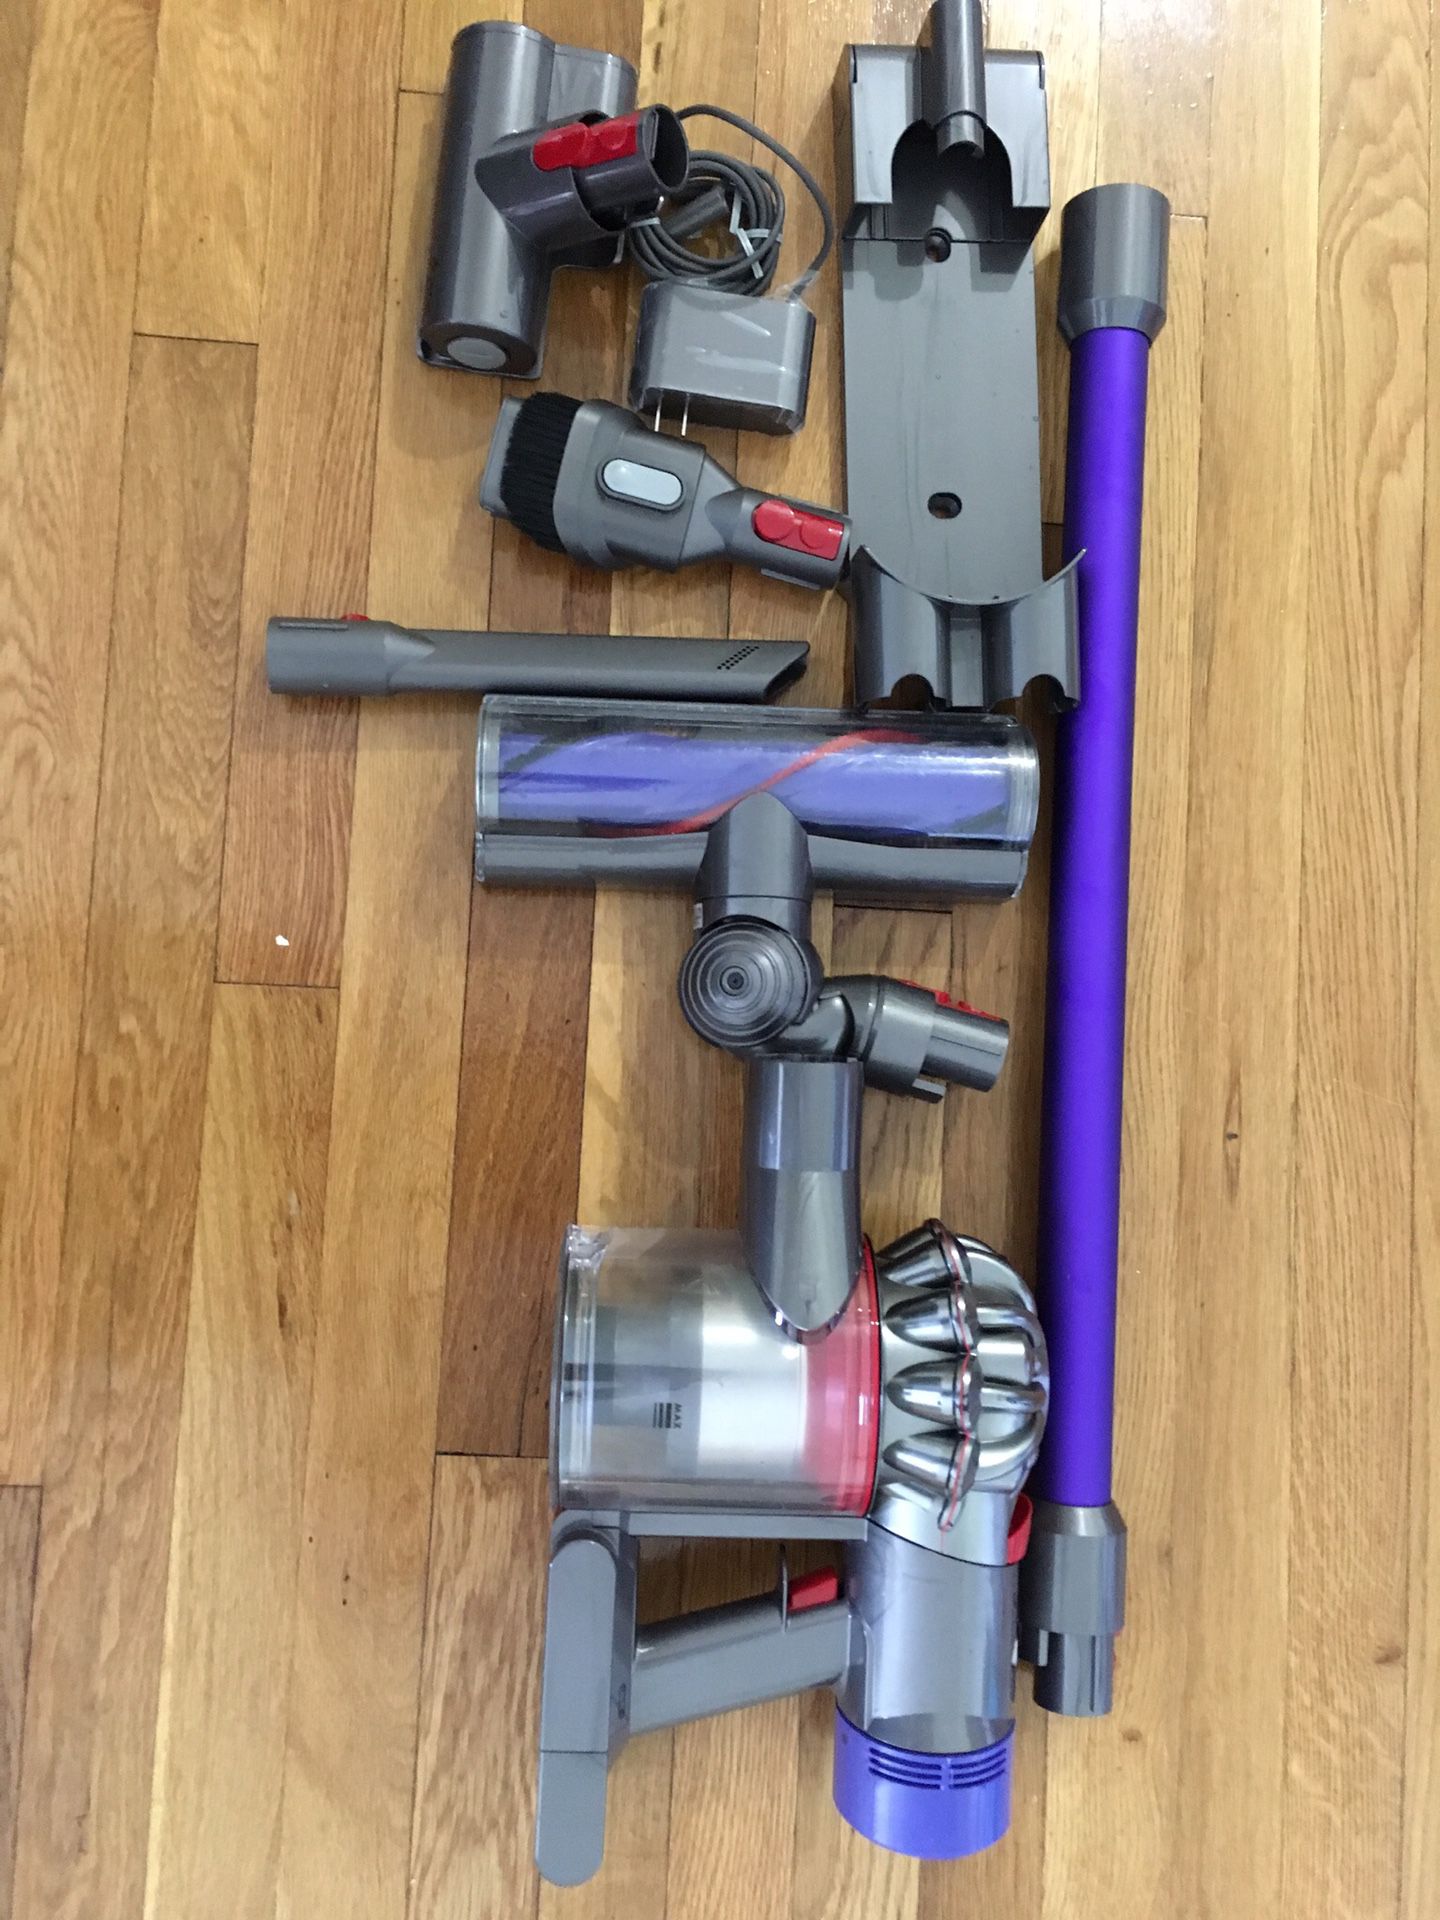 Dyson v8 Animal cordless vaccum cleaner - new ( without original box )